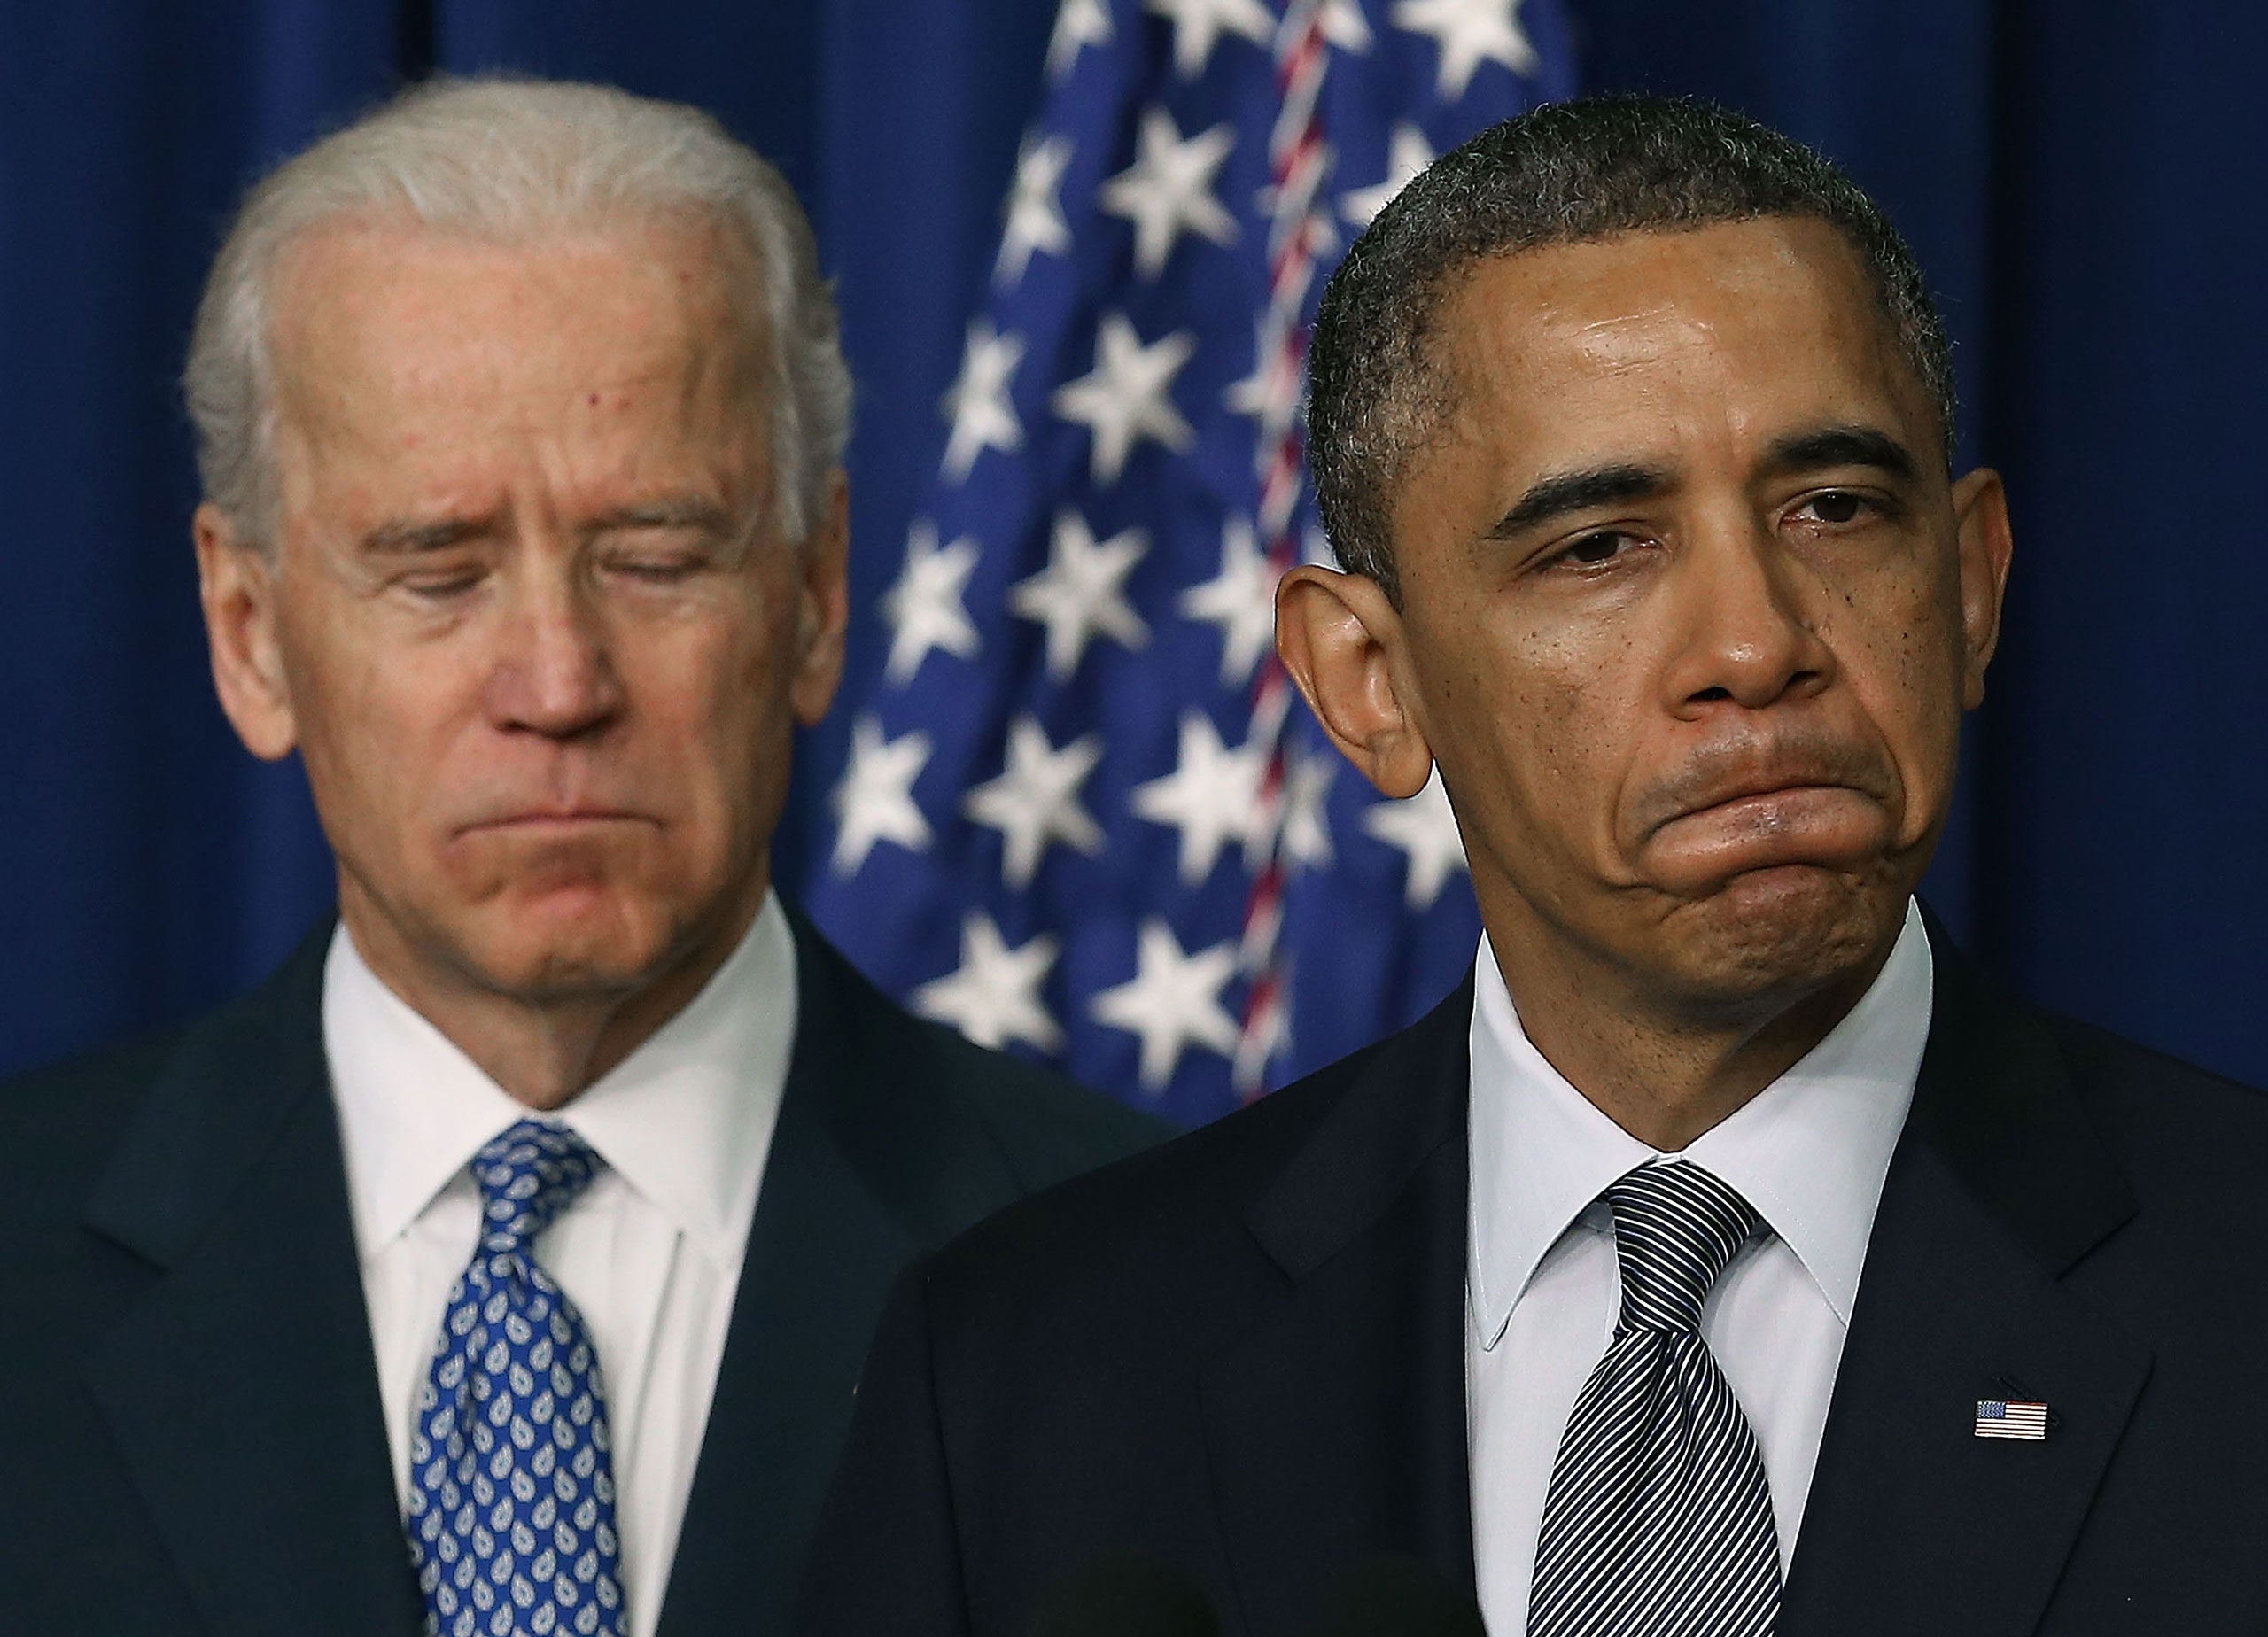 Obama and Biden frowning